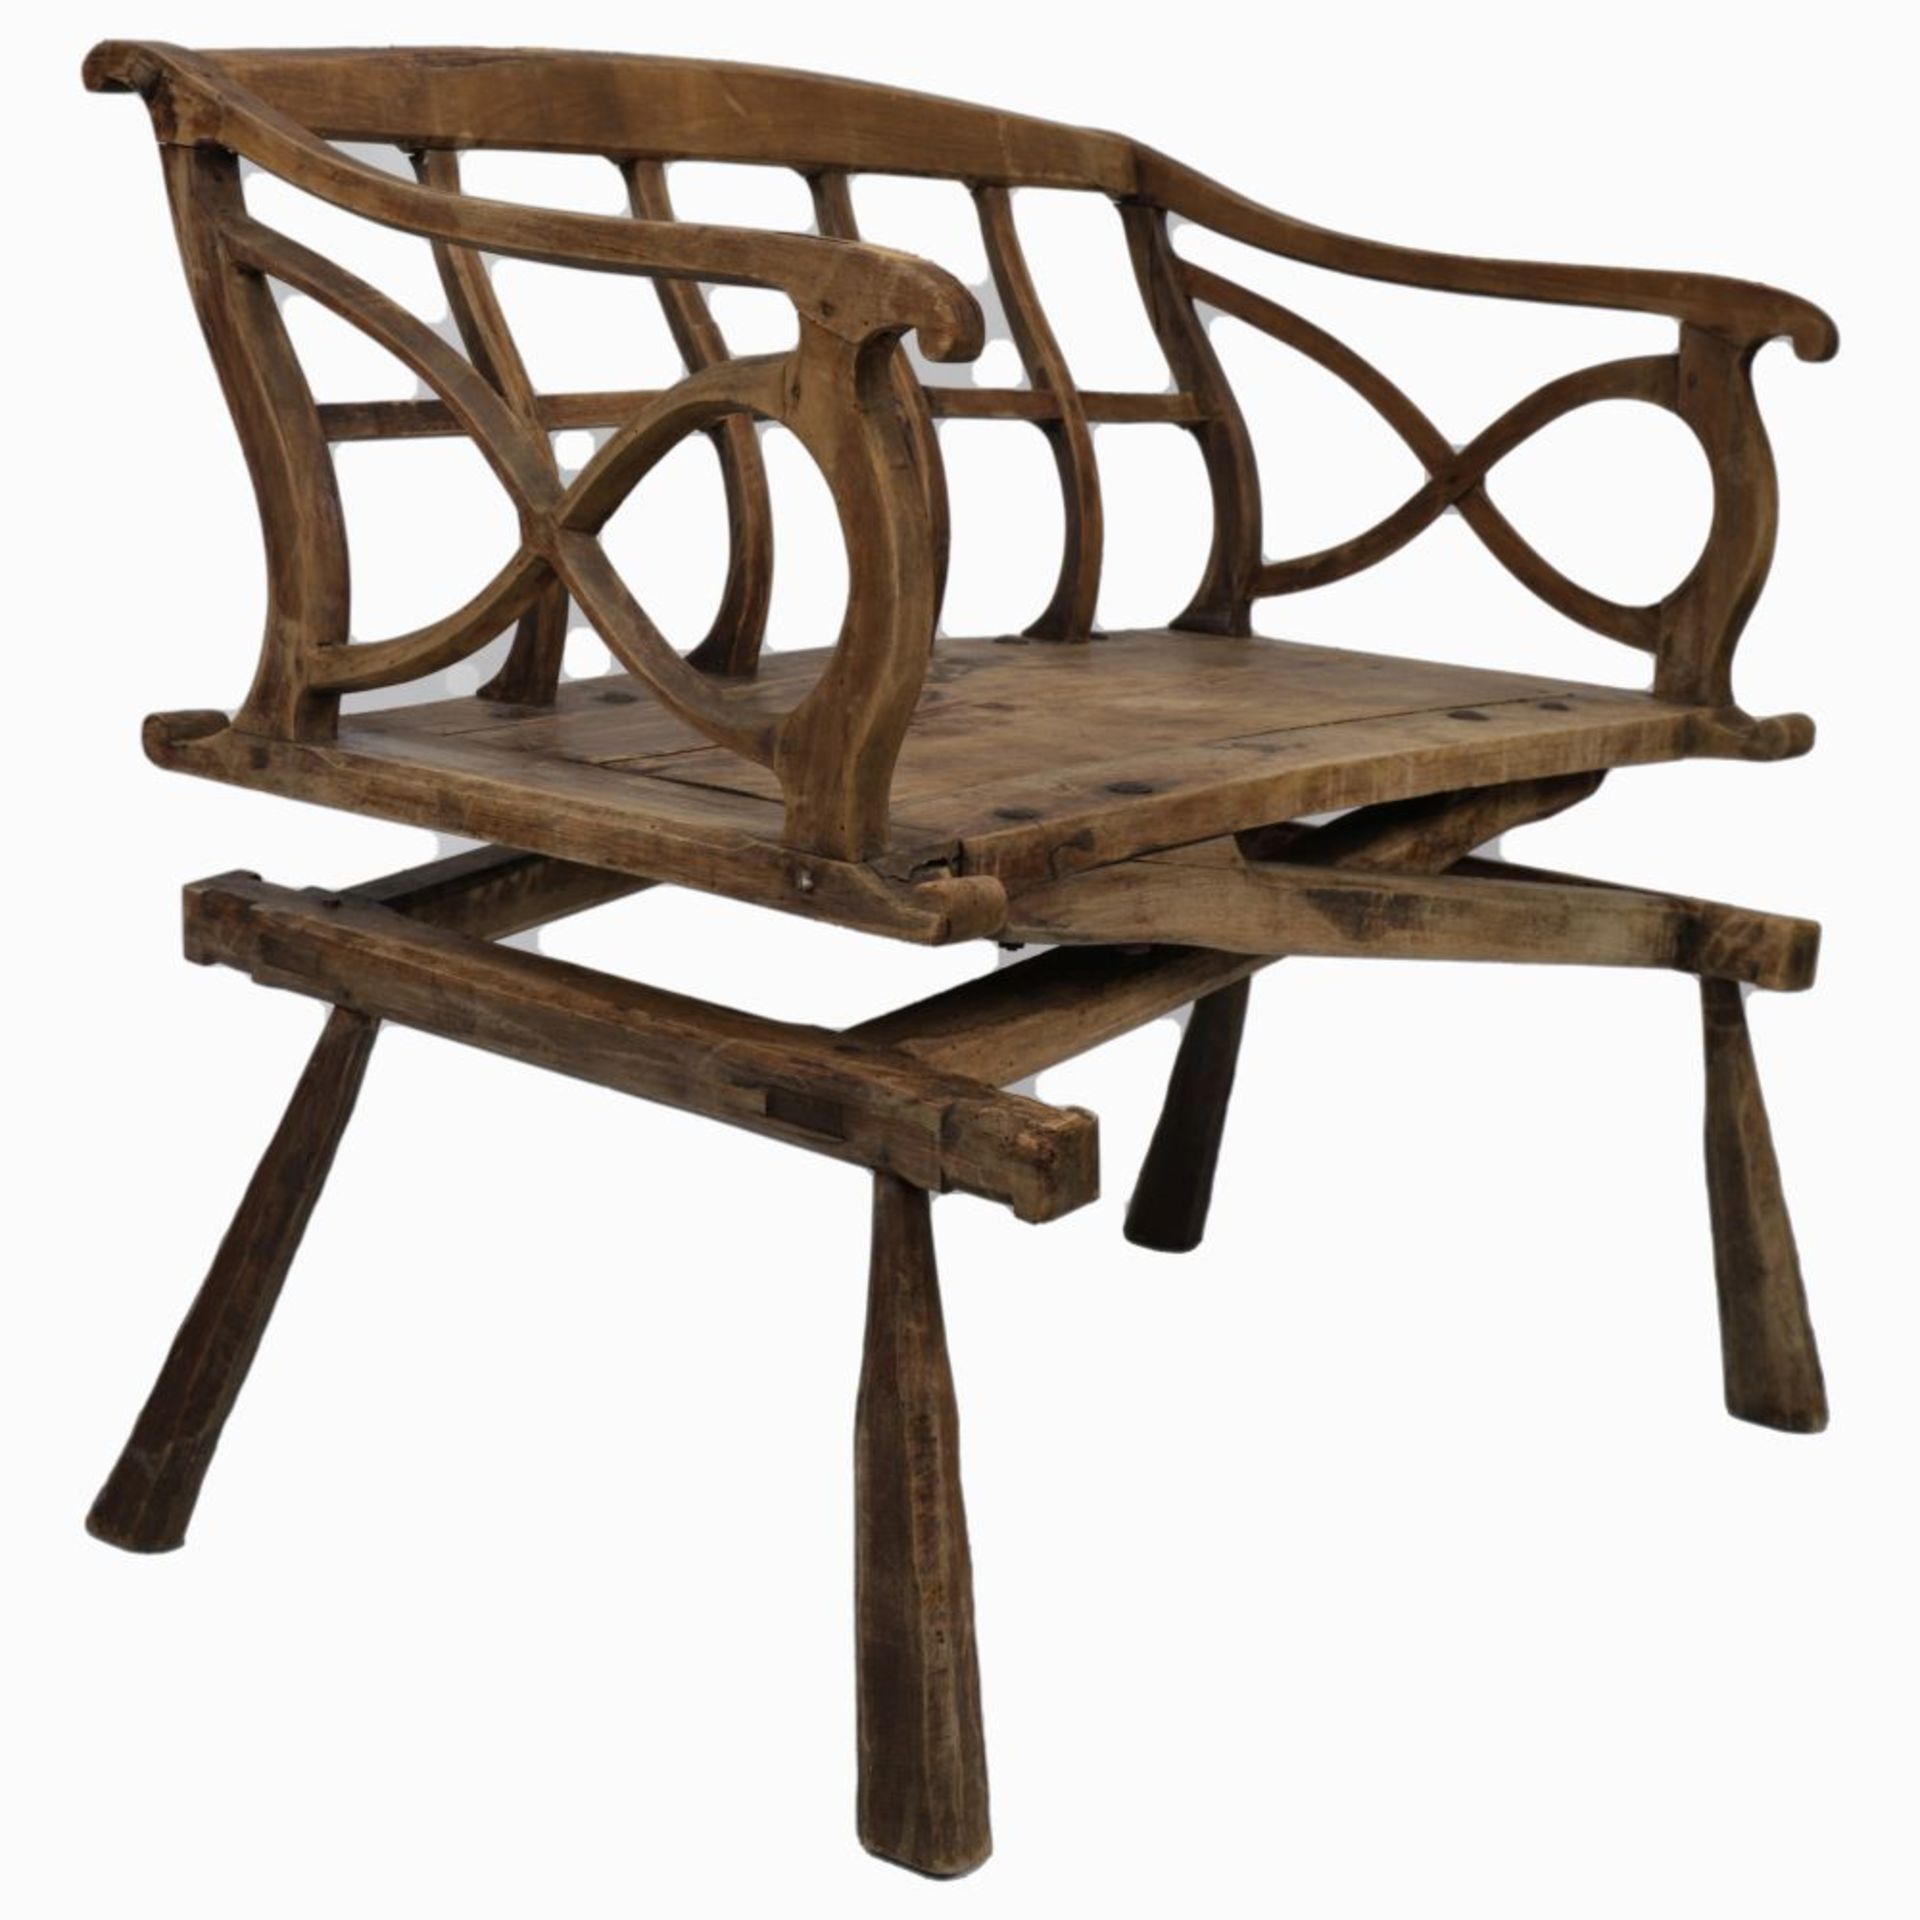 19TH-CENTURY RUSTIC WOOD BENCH - Image 2 of 2